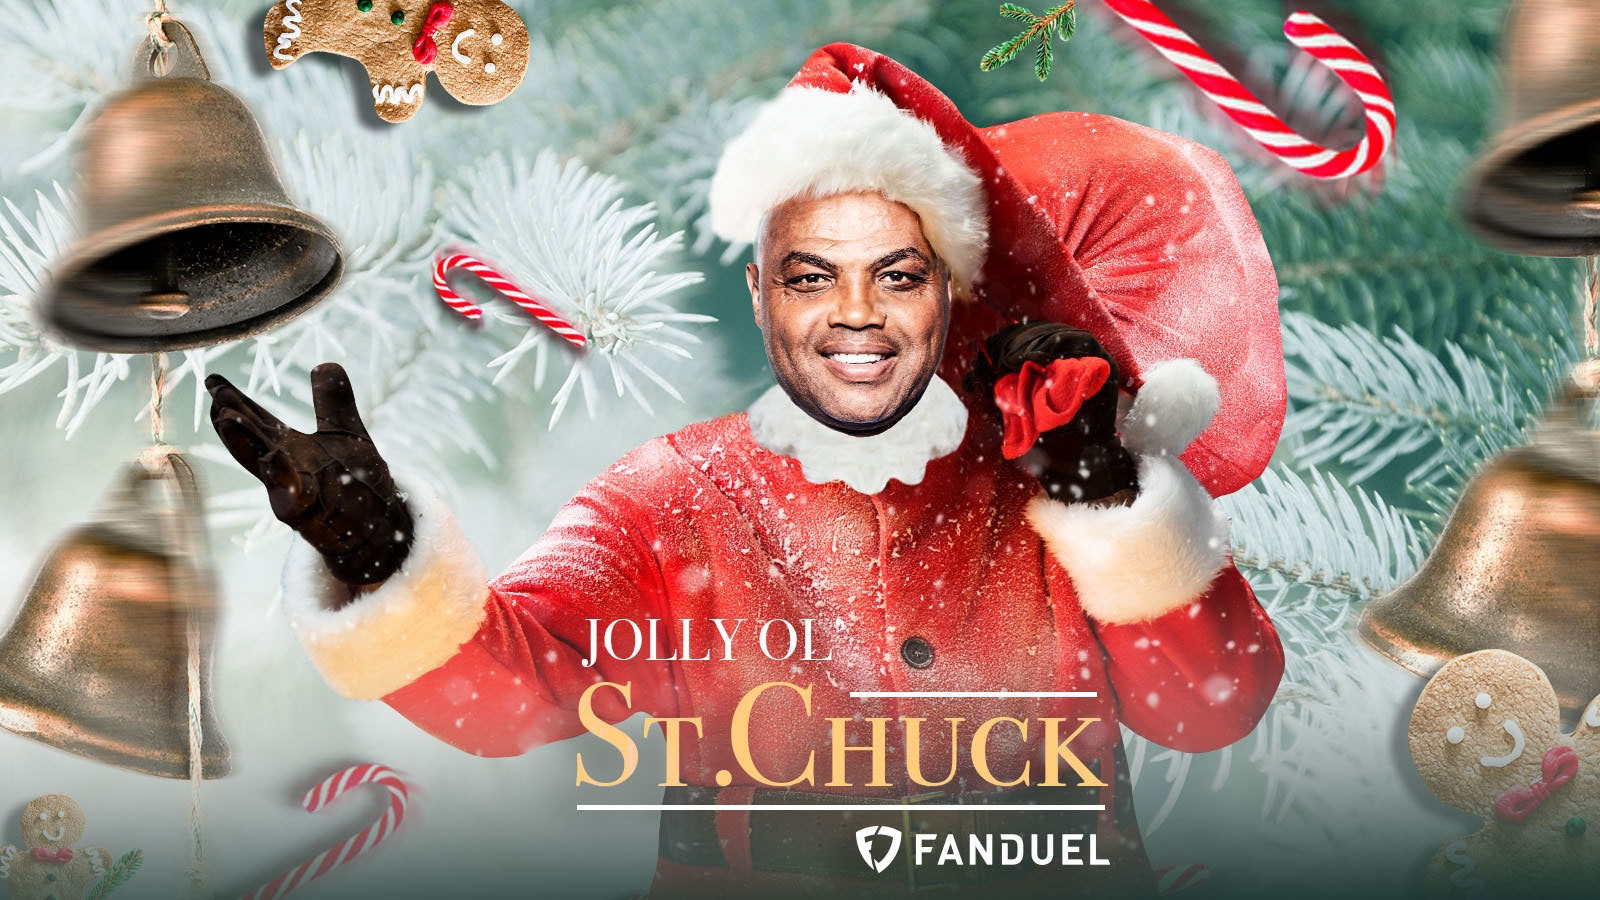 FanDuel Group Announces Exclusive Multi-Year Partnership with Charles Barkley